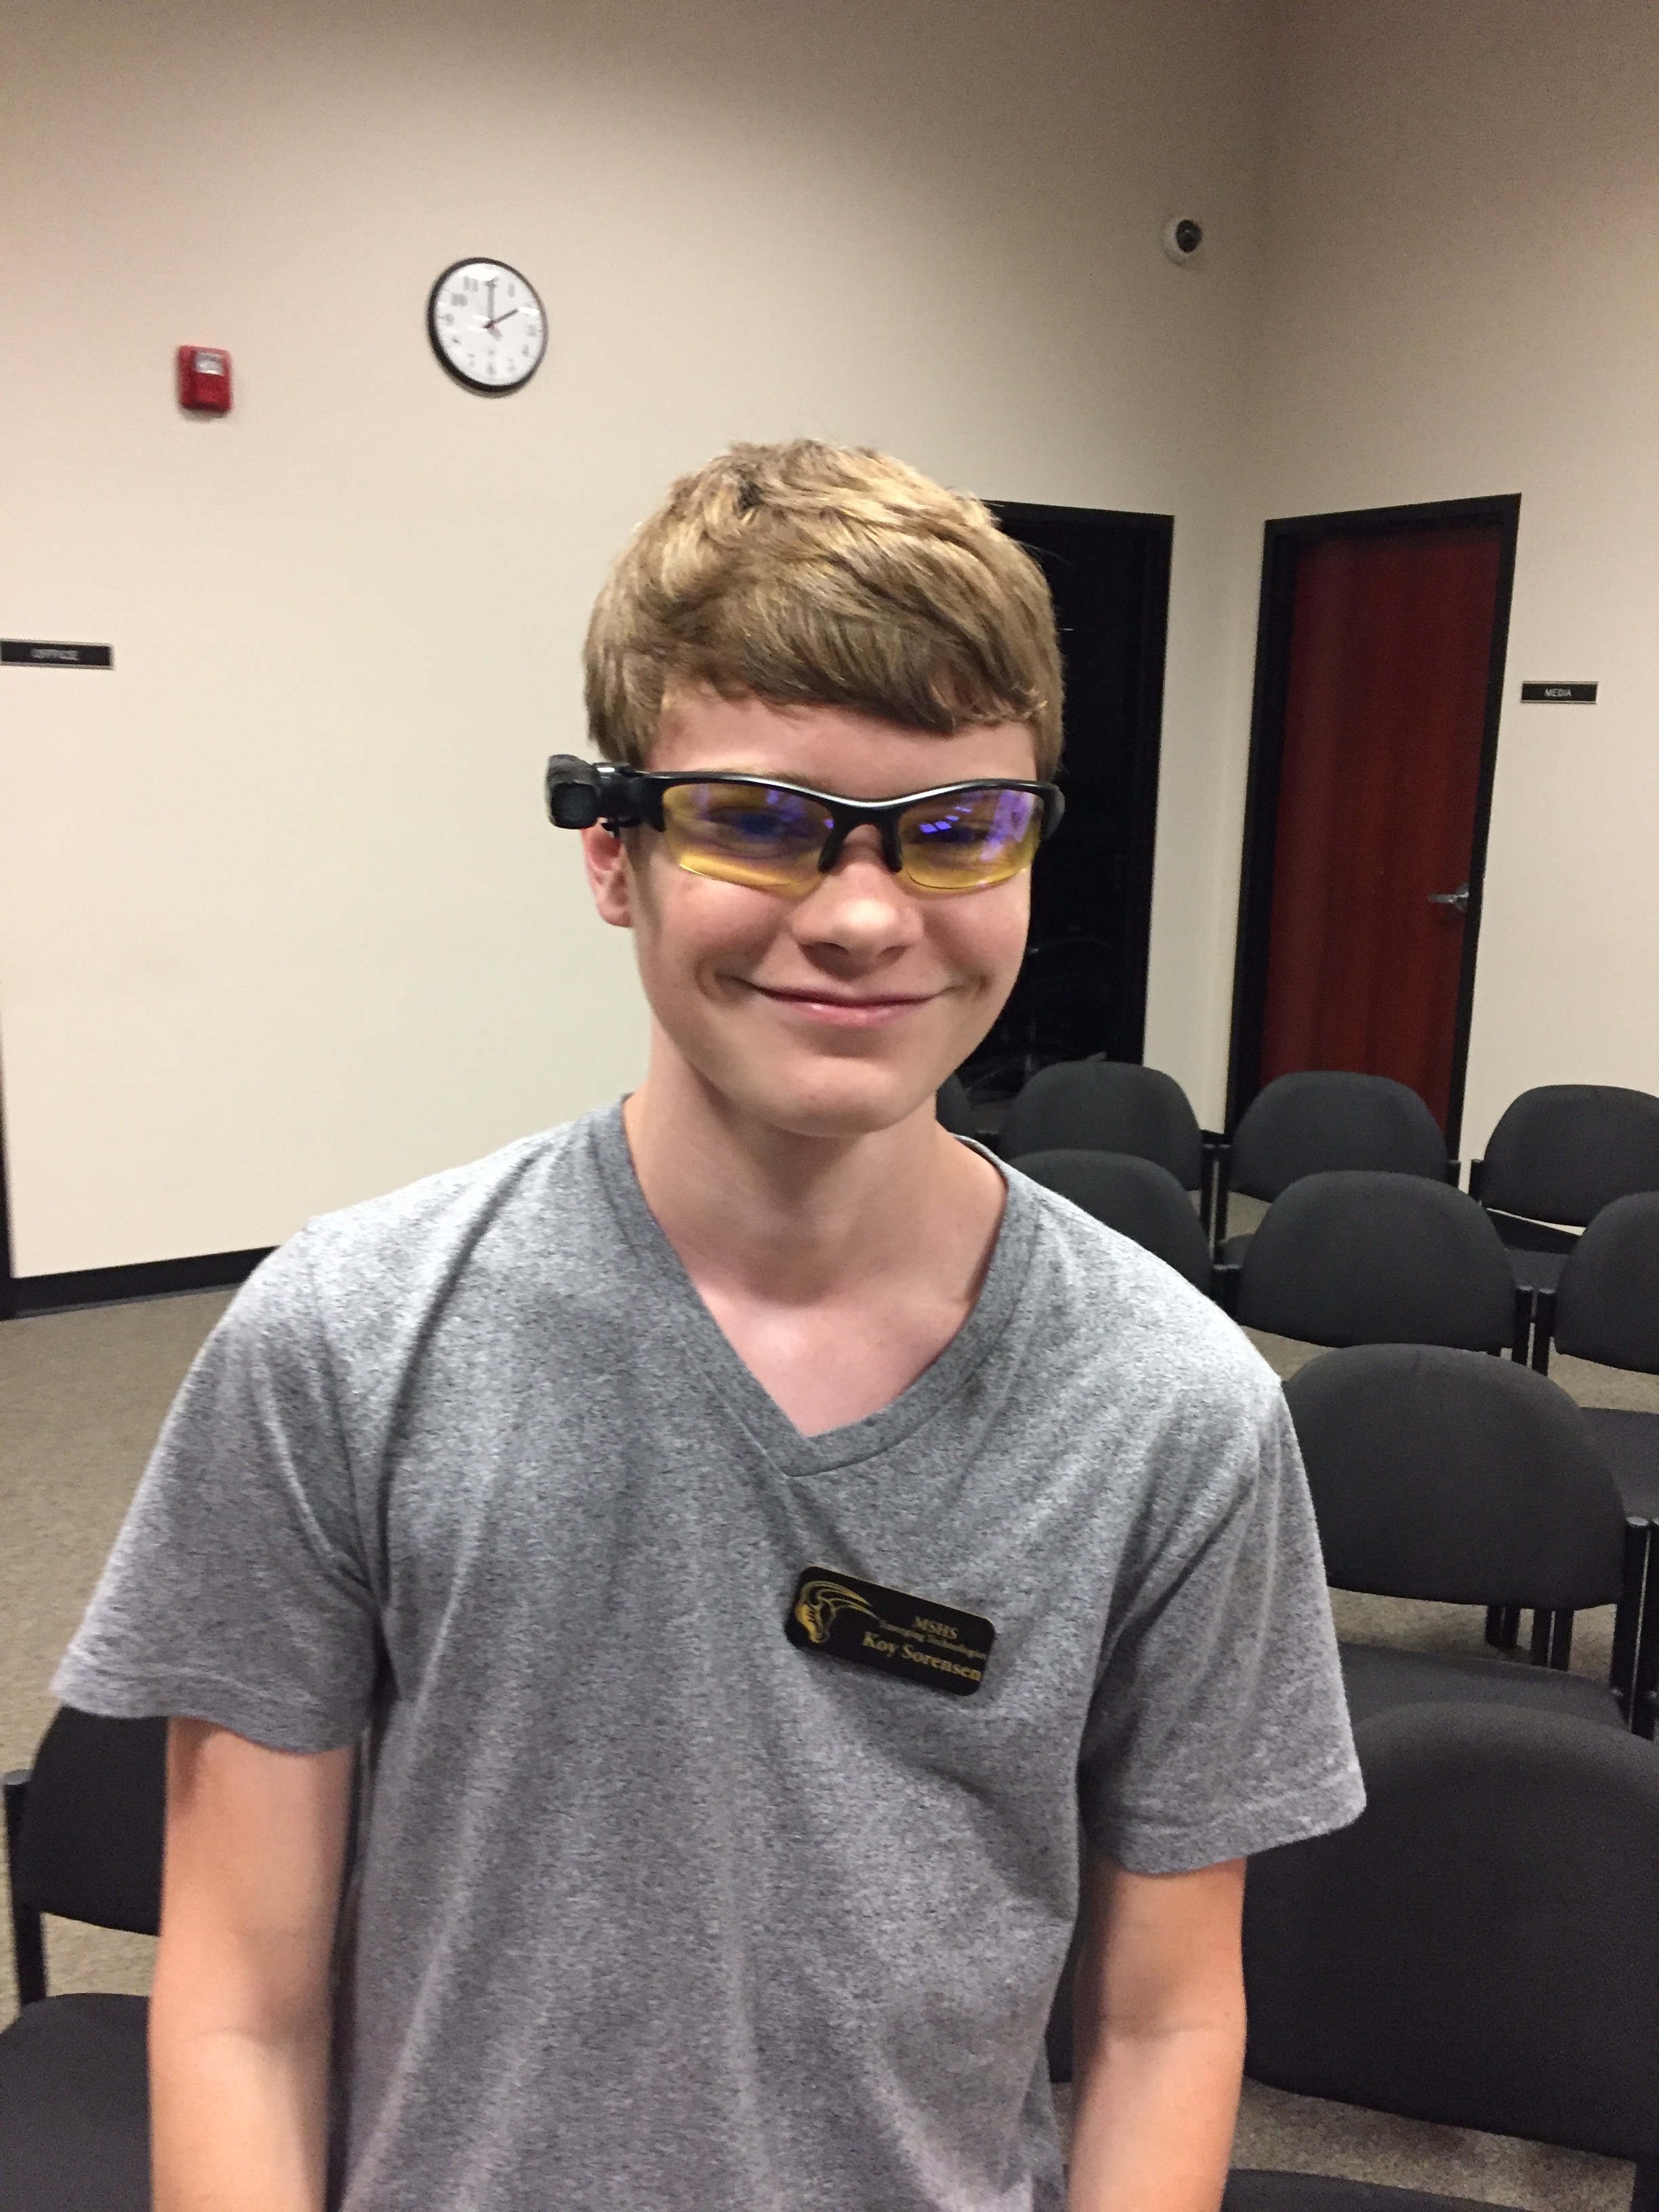 Emerging Tech student tries on Police glasses camera.